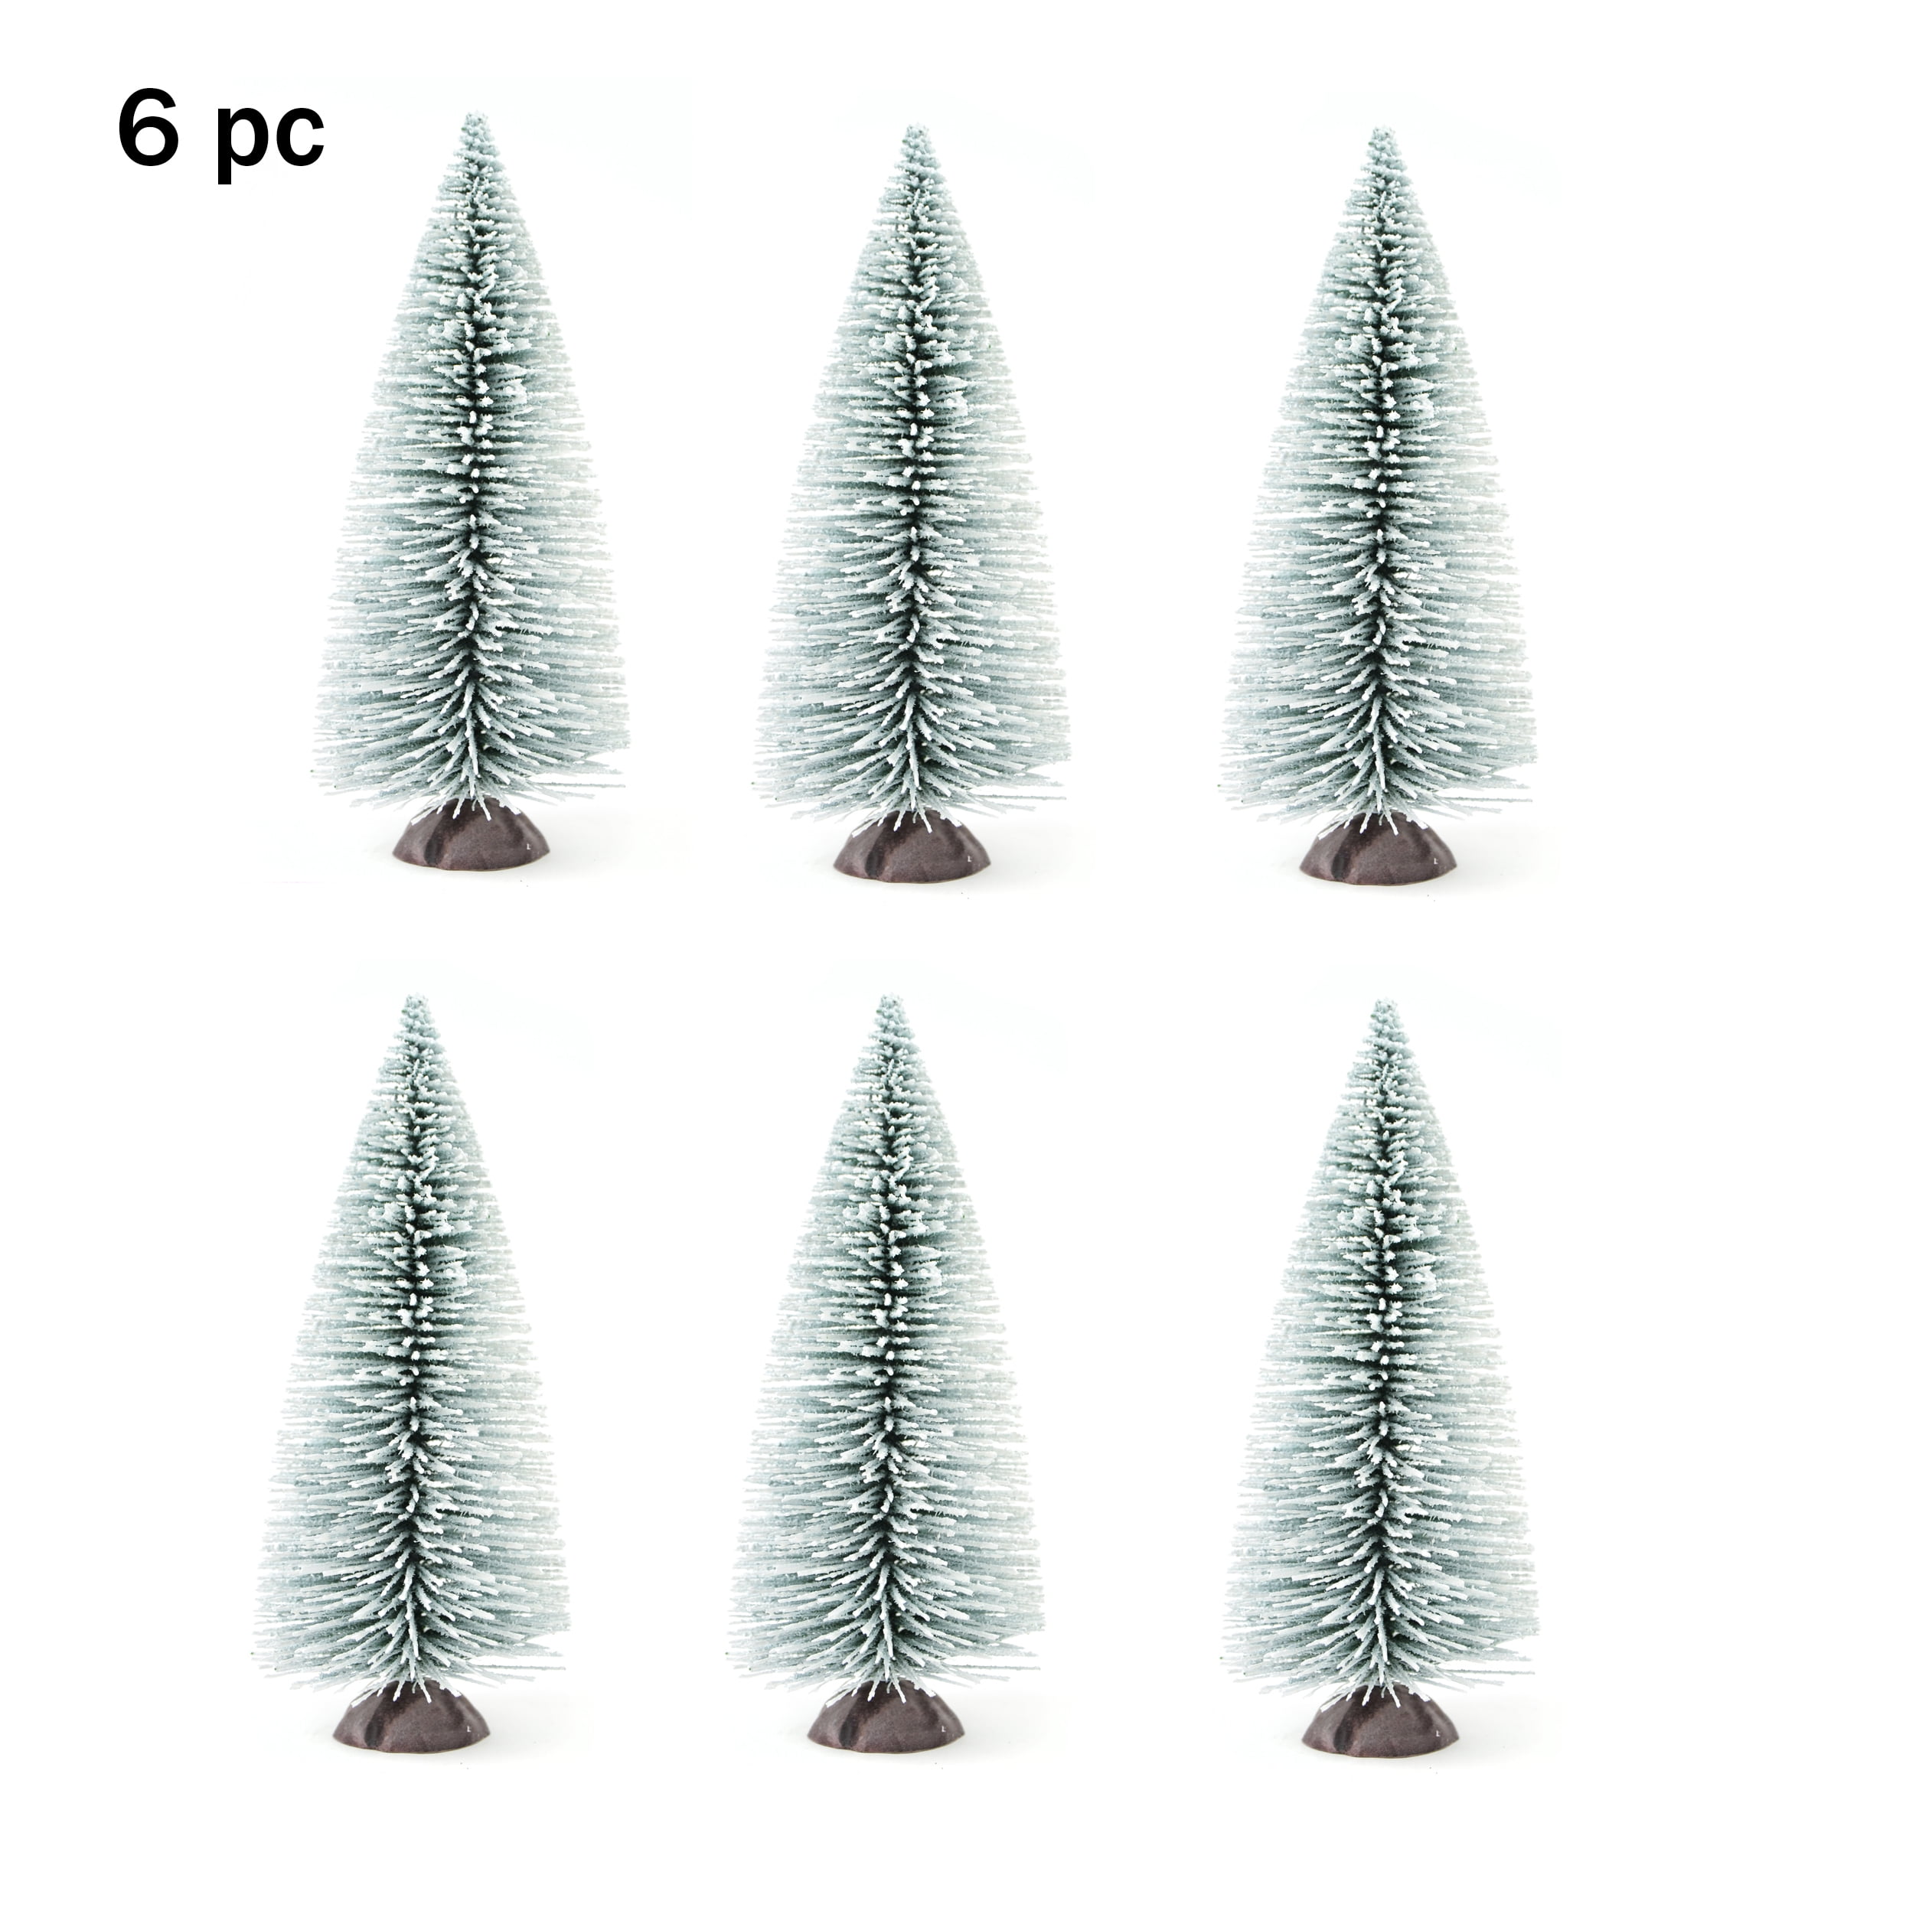 Miniature Snow Frost Wooden Bases Mini Pine Tree DIY Craft Christmas Ornaments 43pcs Artificial Sisal Christmas Tree Great Decor for Home Birthday Parties Festival Wedding PinnacleT1